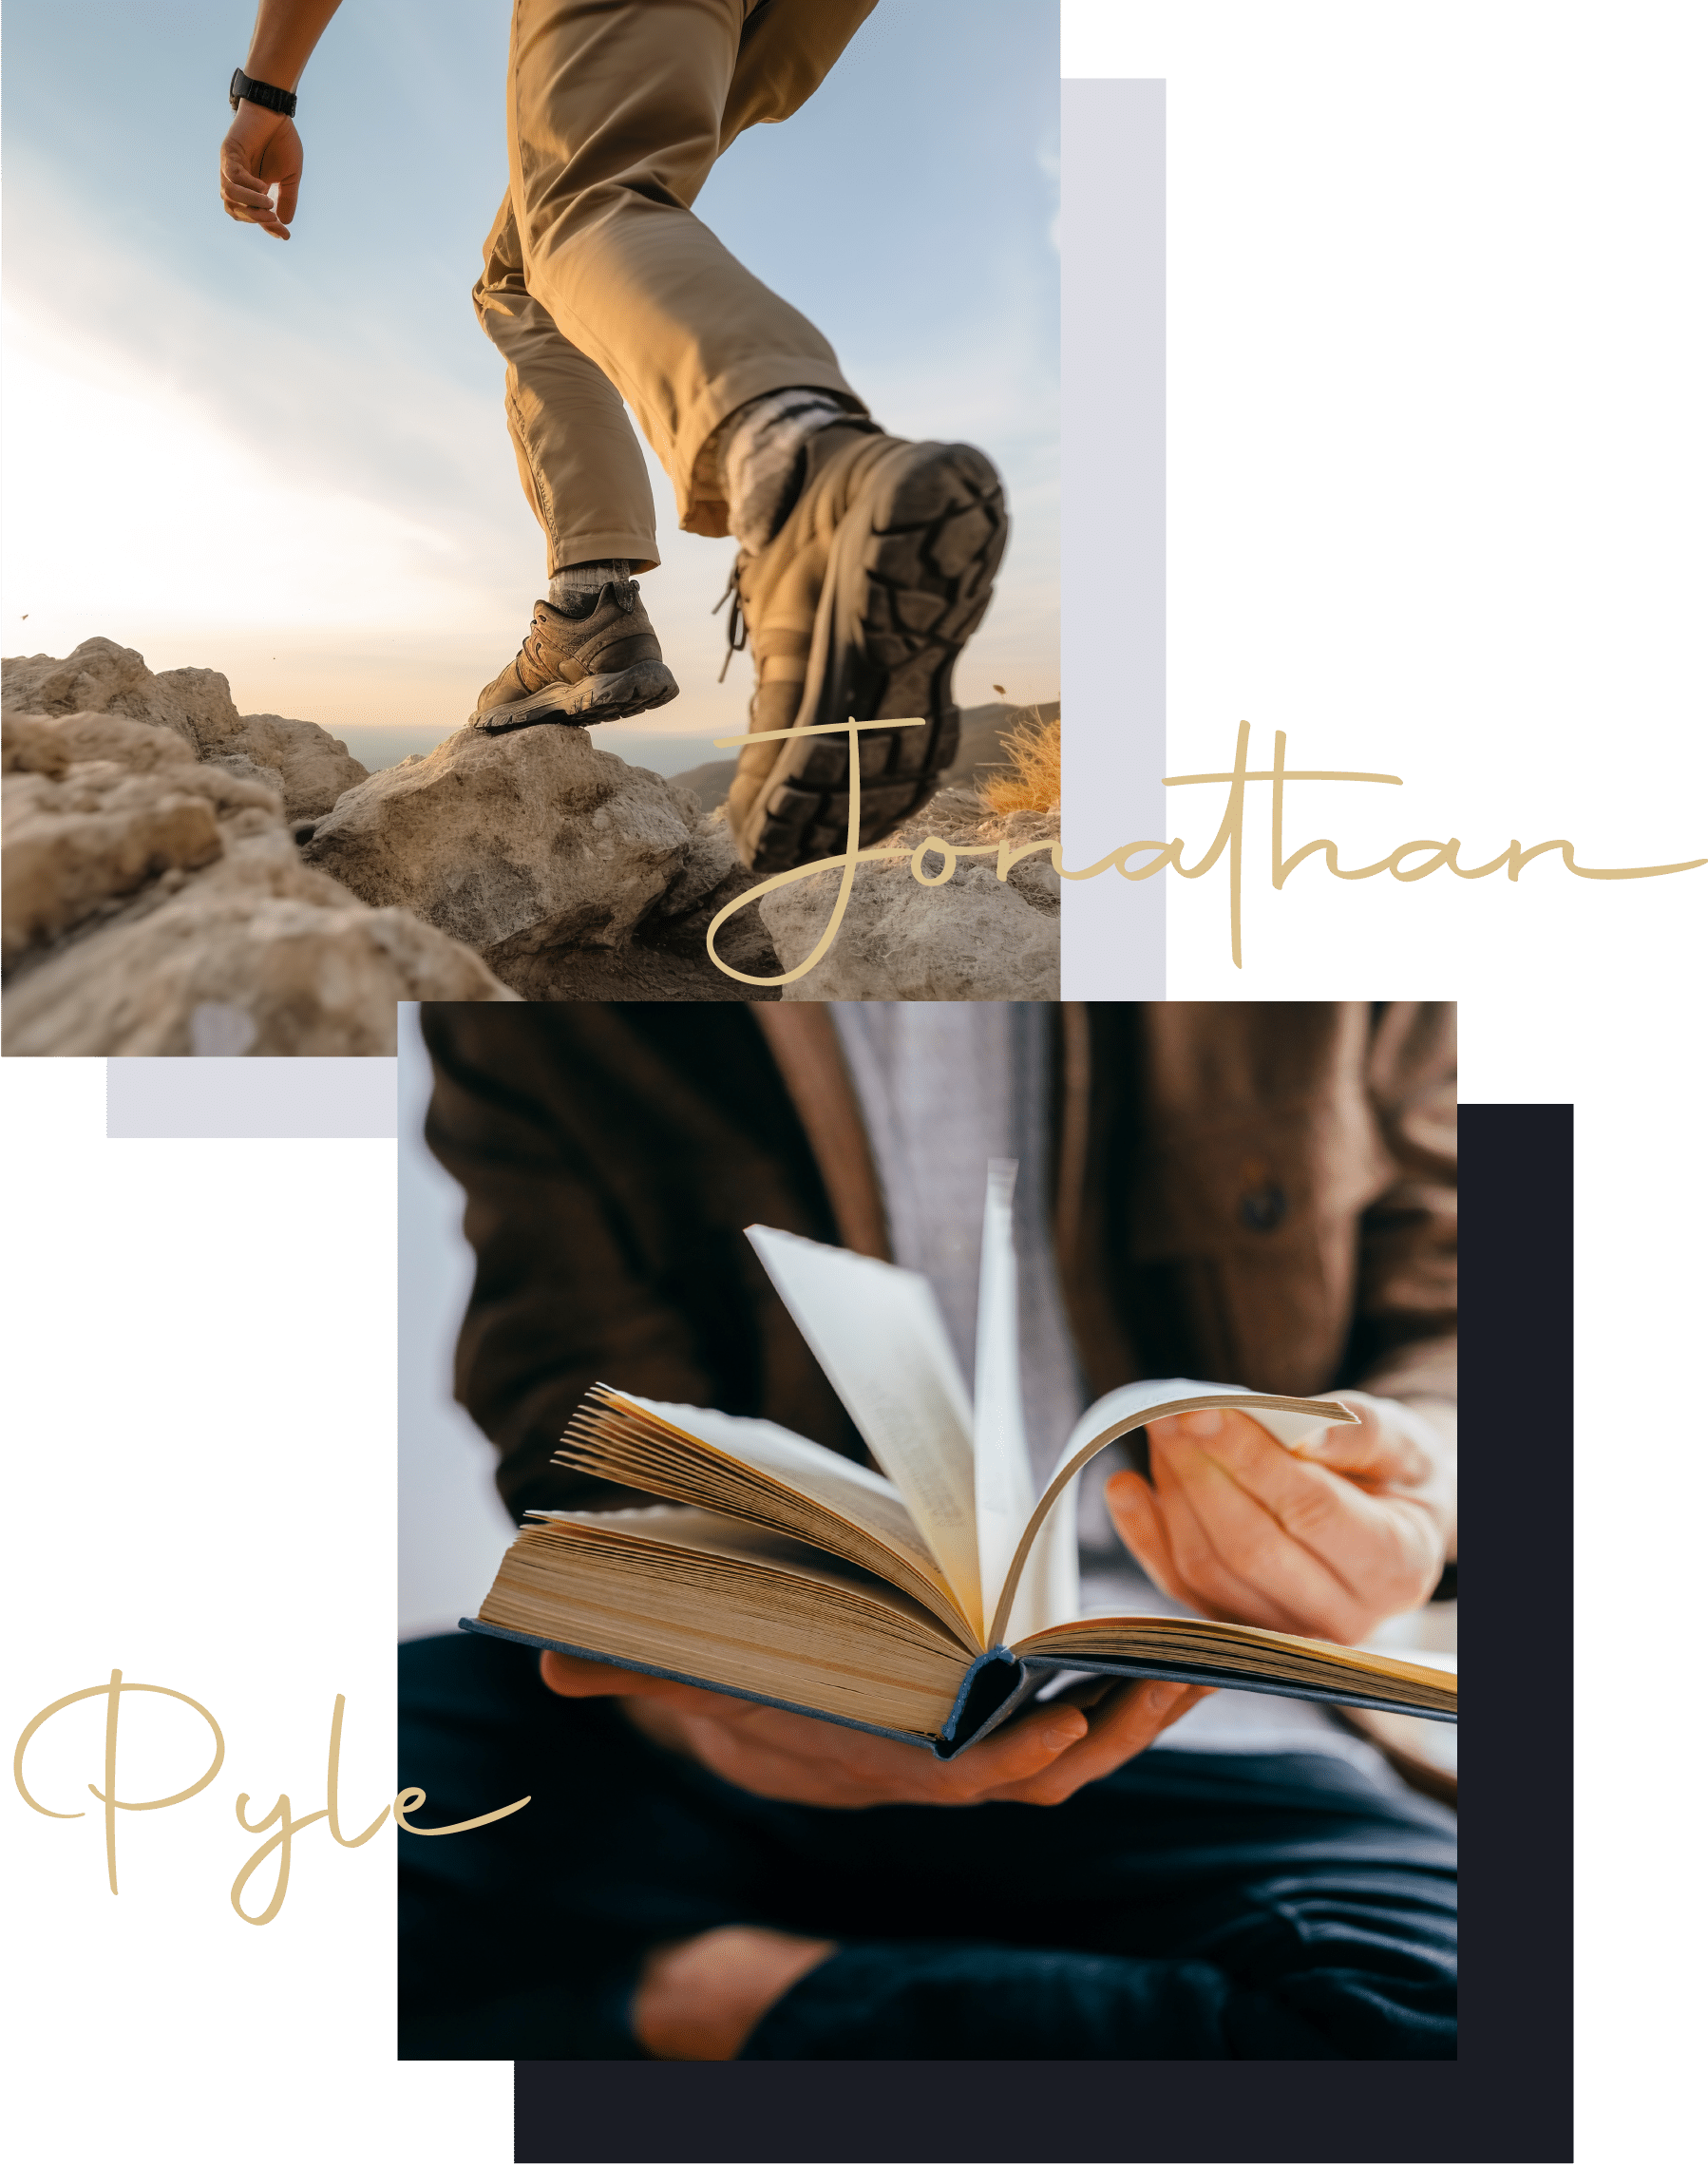 books and hiking boots for jonathan pyle DMD